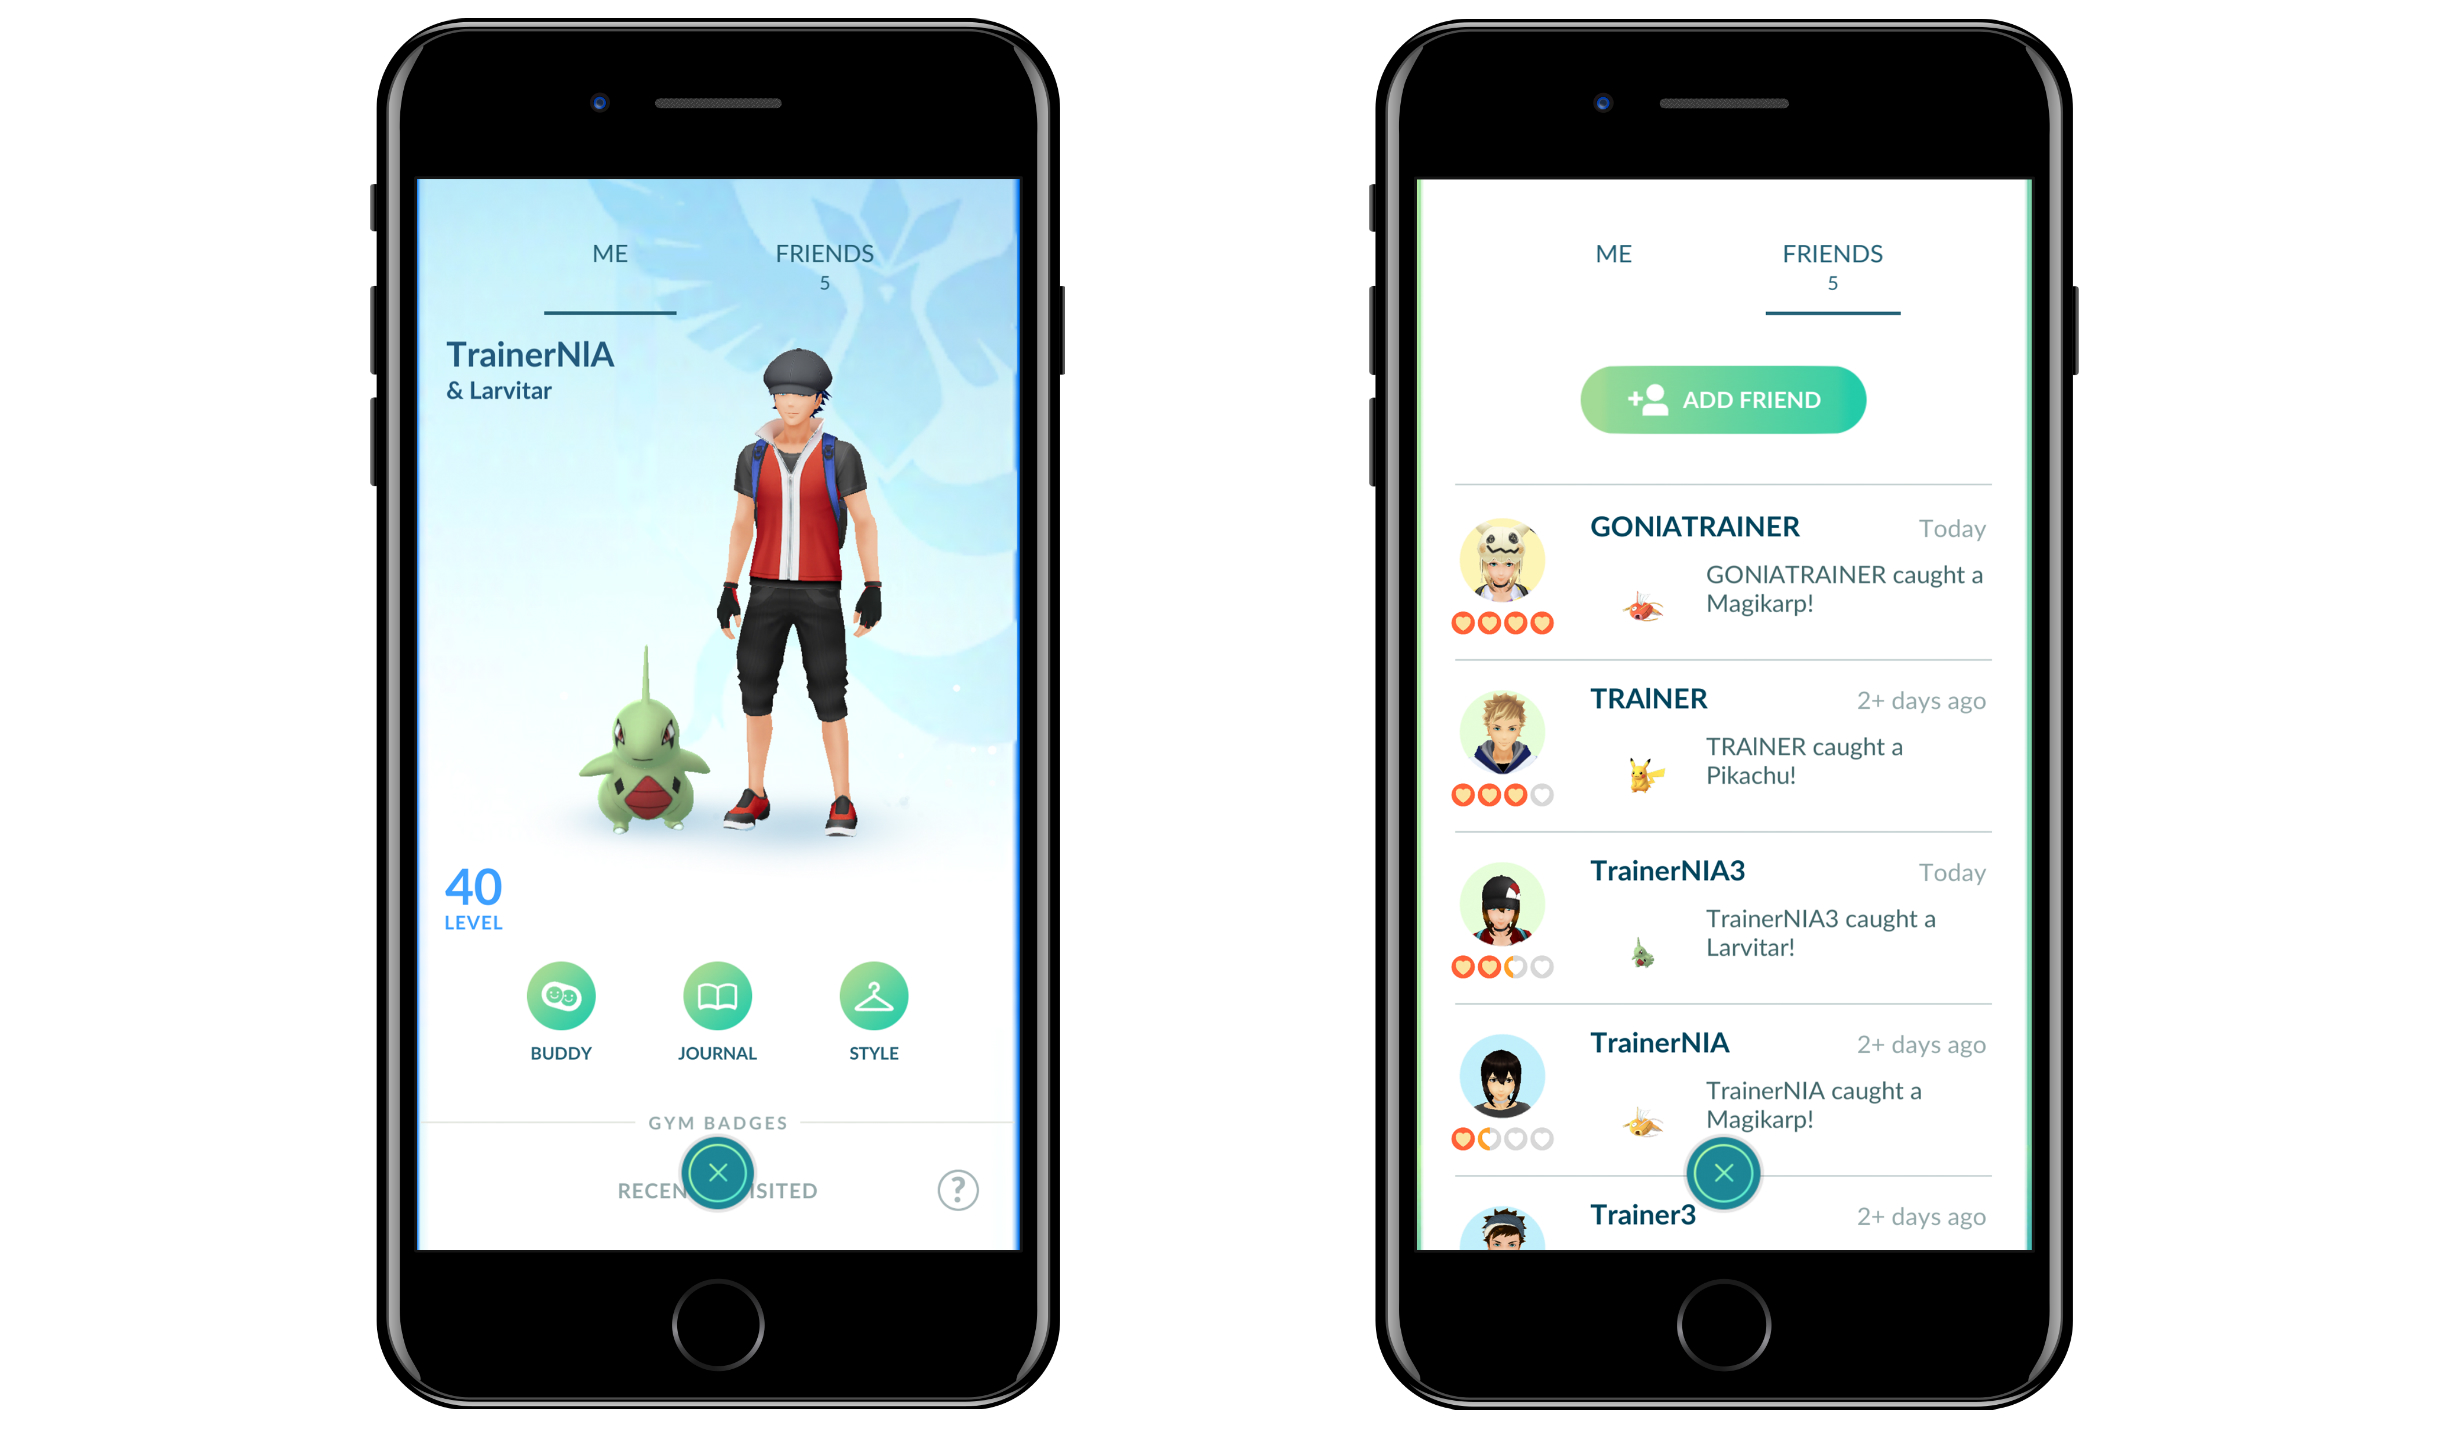 Pokemon Go trading tips and tricks: How to trade, add Friends, and